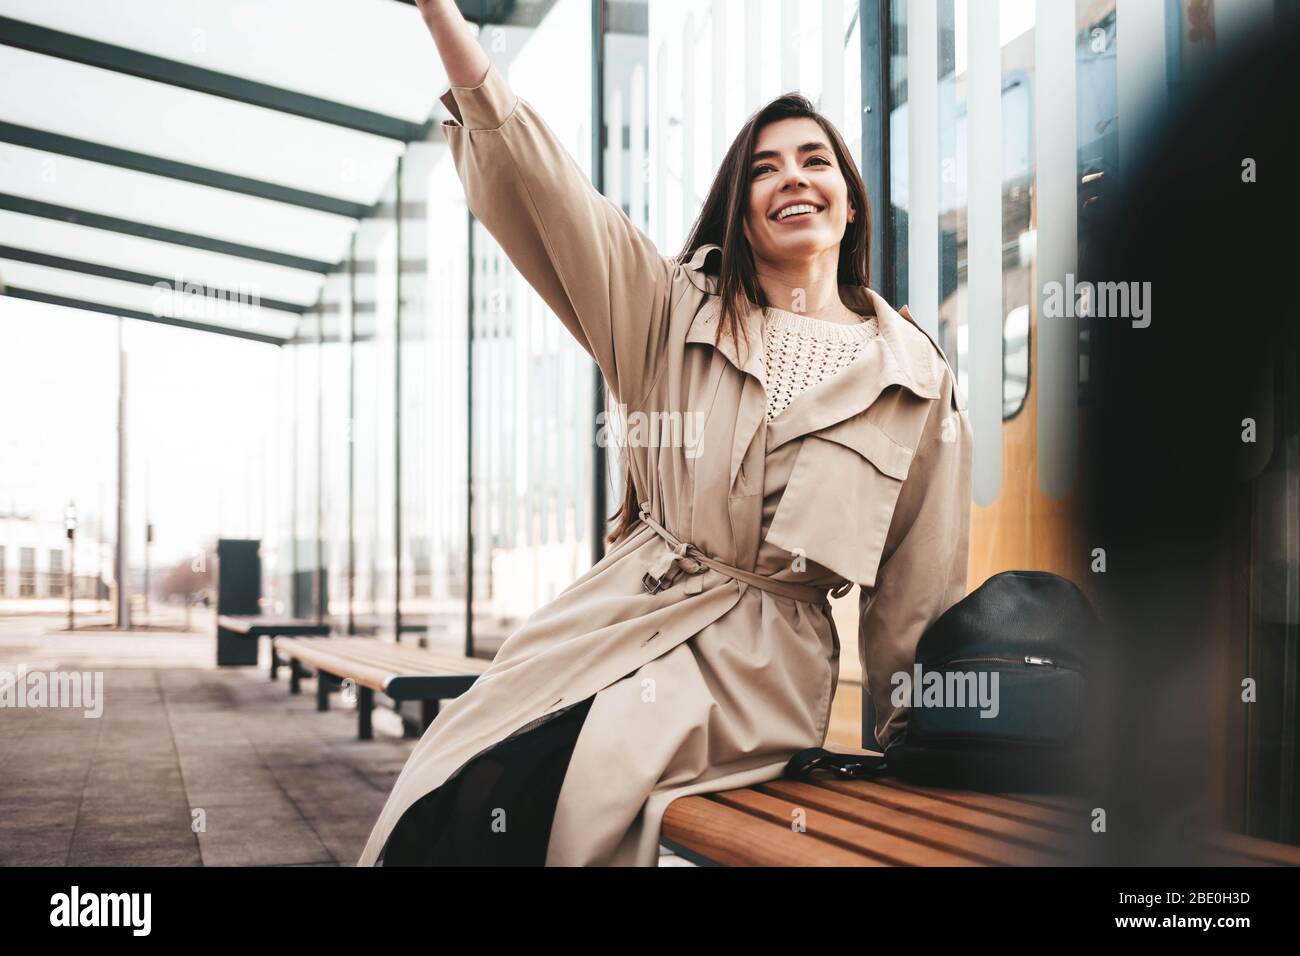 Positive young woman sitting at a public transport stop and waving Stock Photo